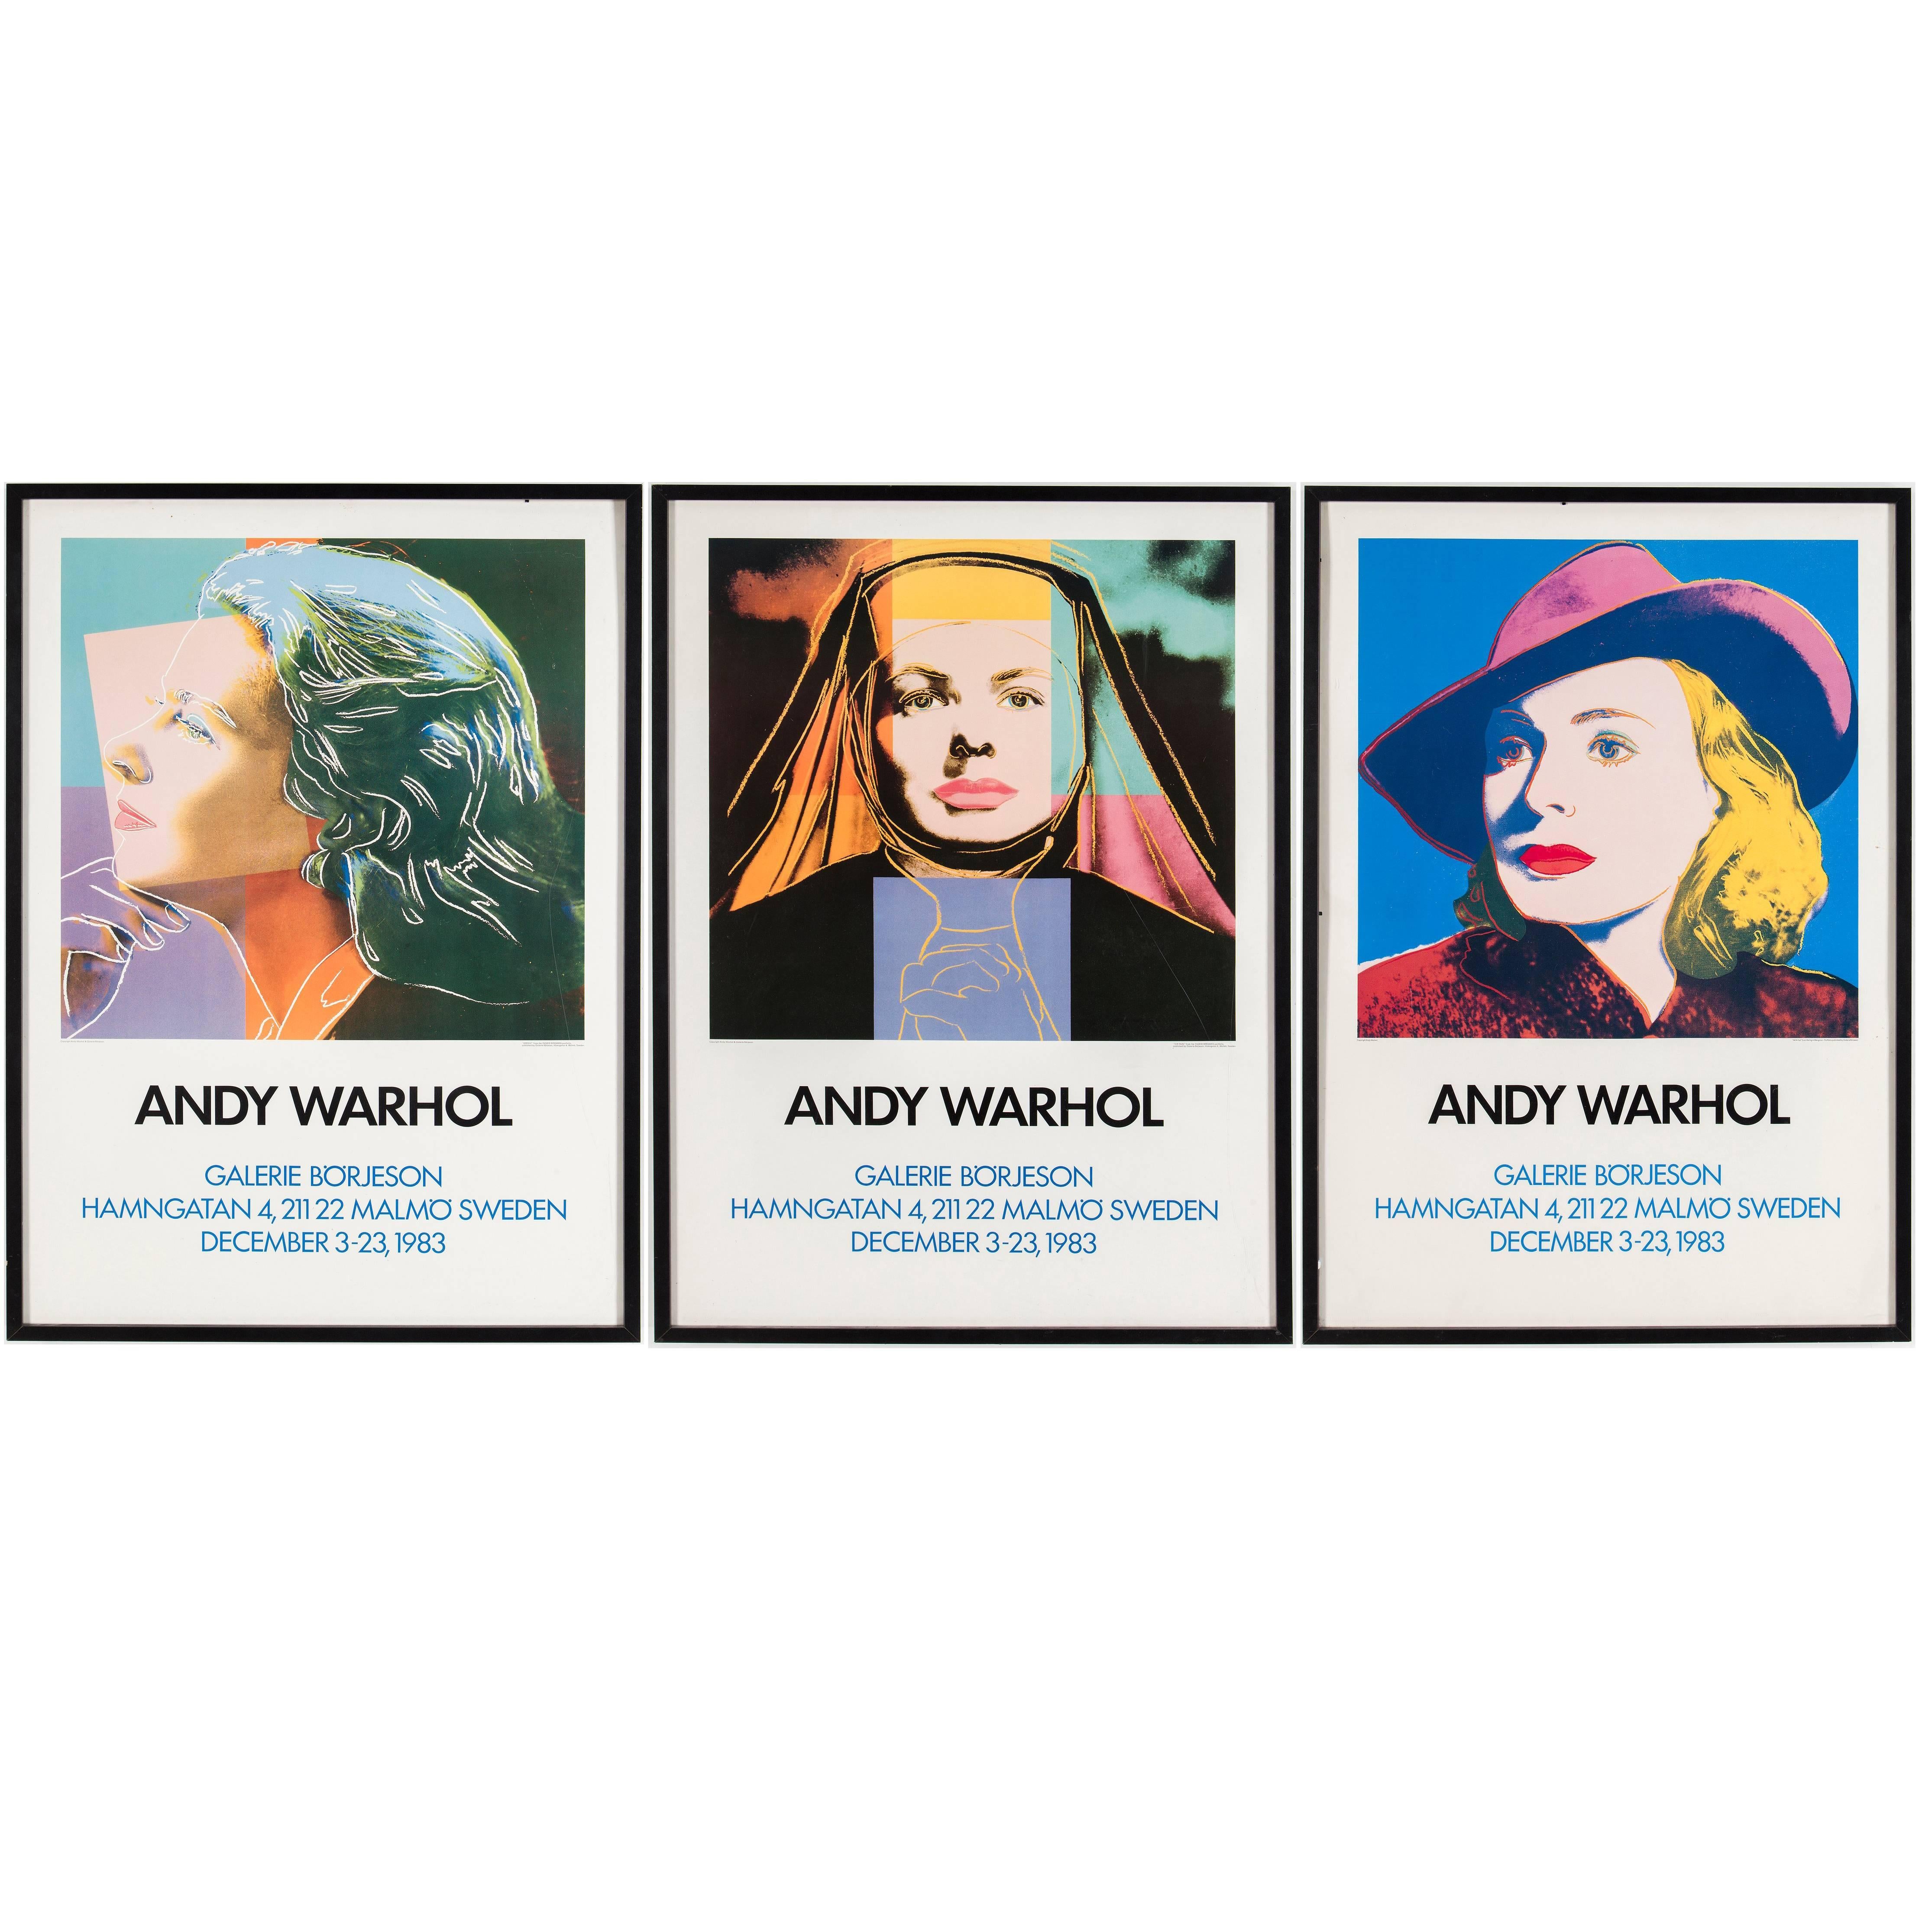 Triptych Portrait of Ingrid Bergman posters after Andy Warhol